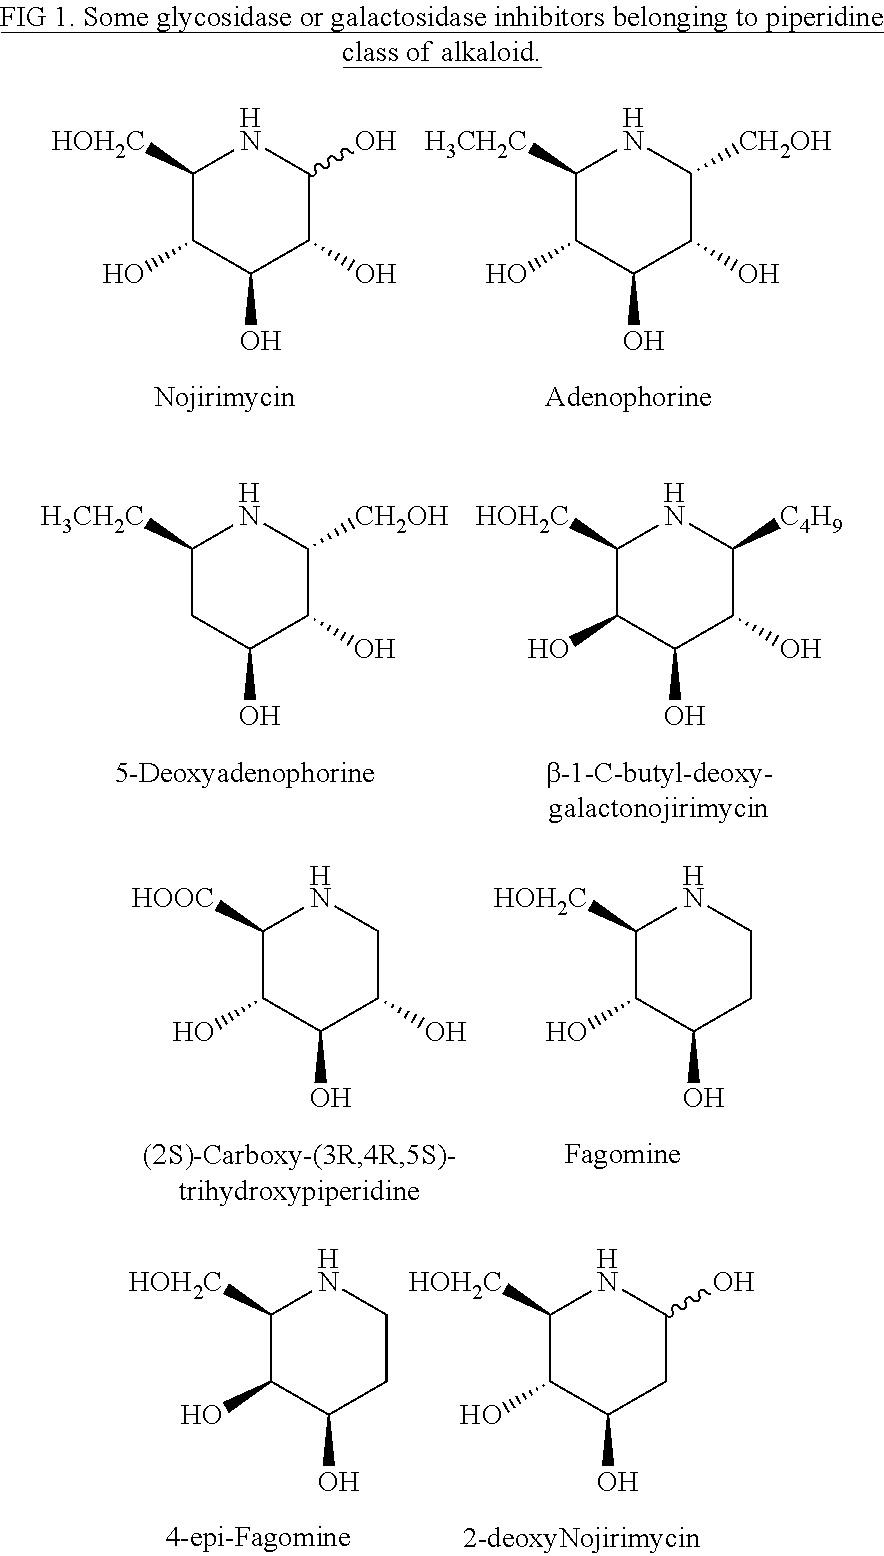 Process for synthesis of piperidine alkaloids